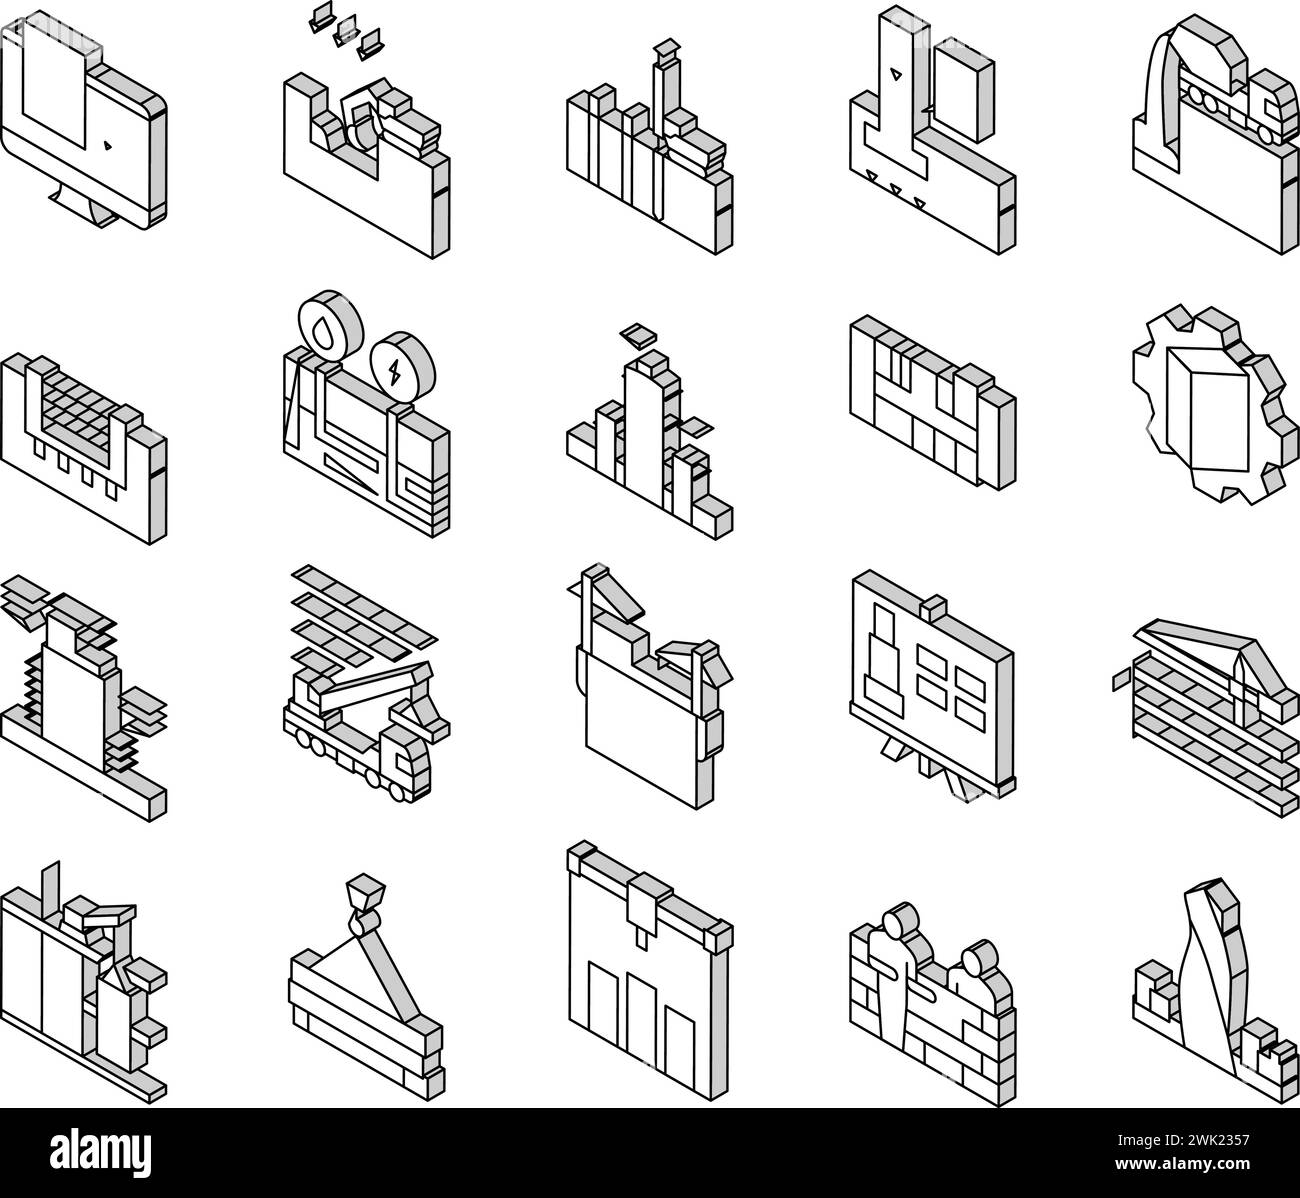 Building Construction Collection isometric icons set vector Stock Vector